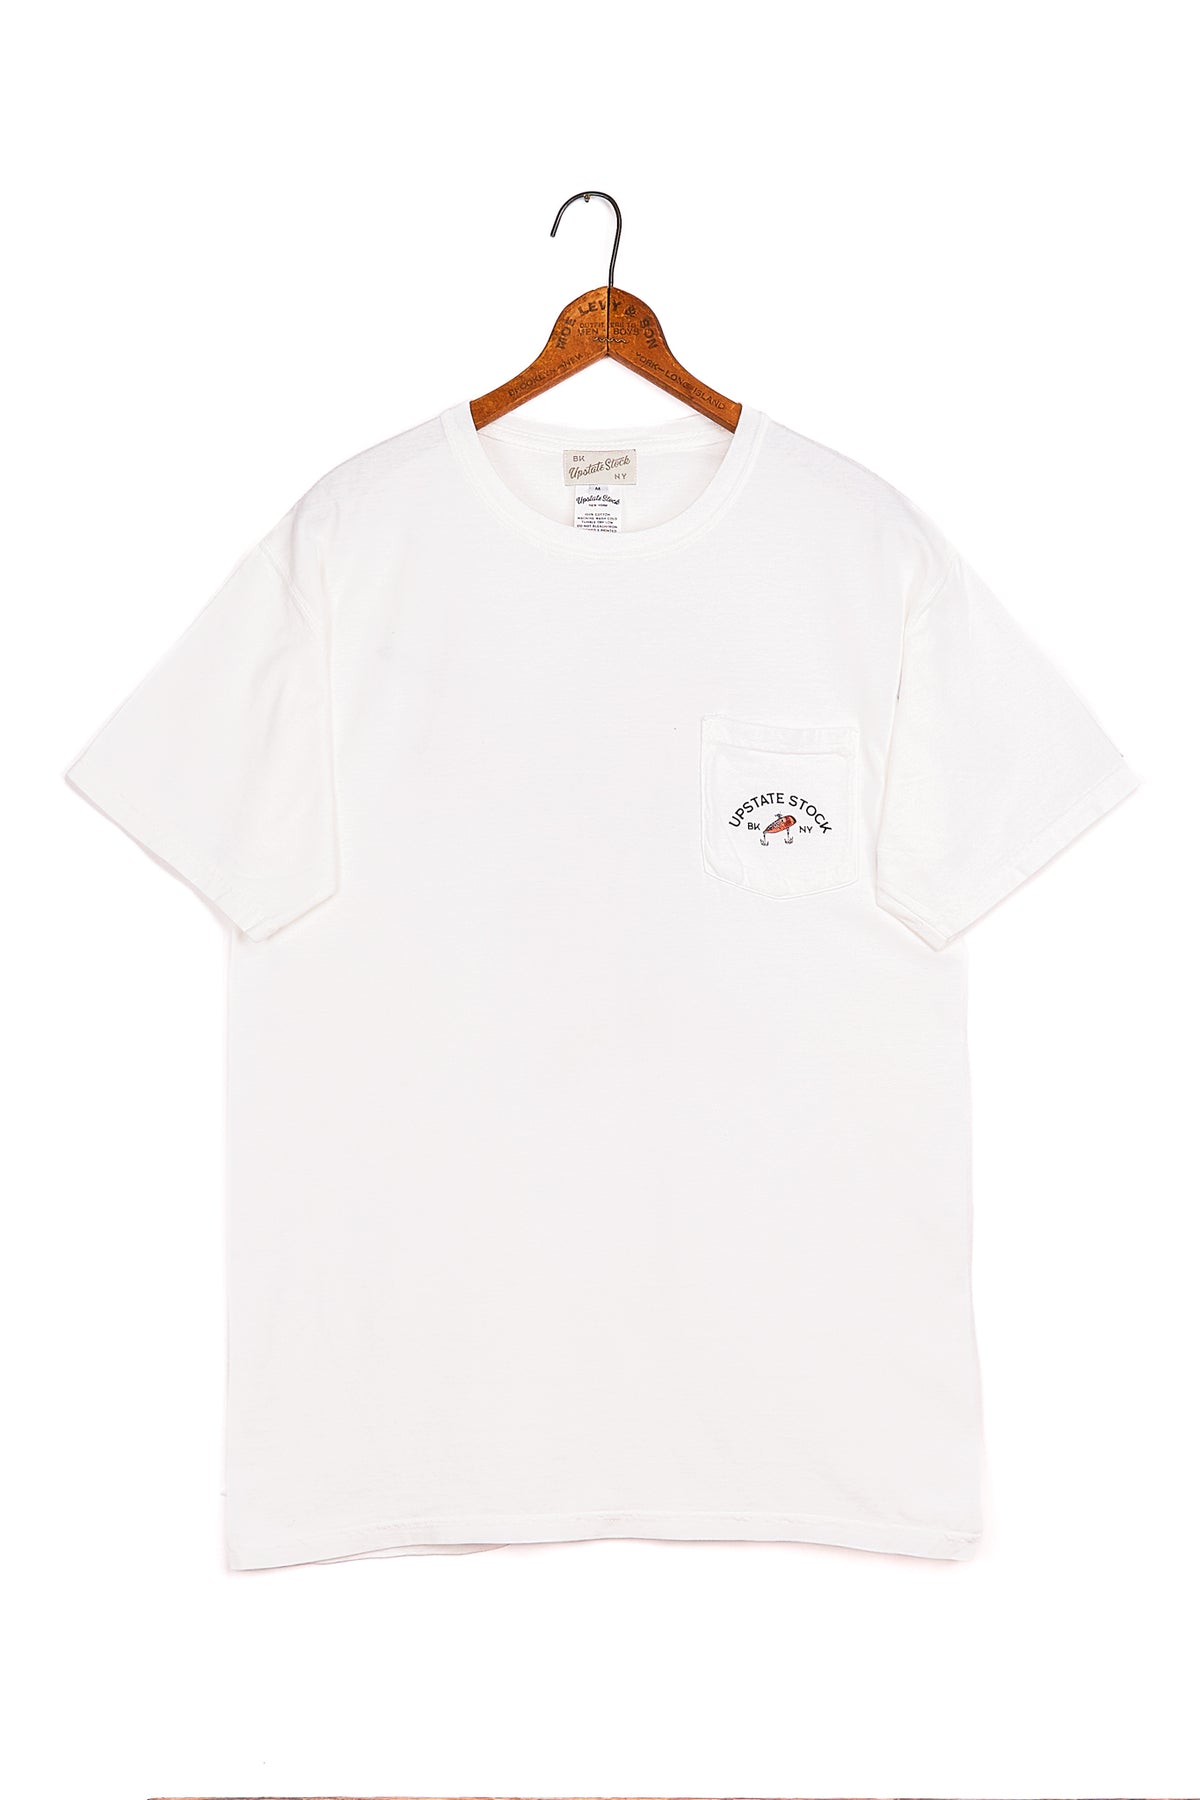 The American Cotton Pocket Tshirt - THE DRIFTER